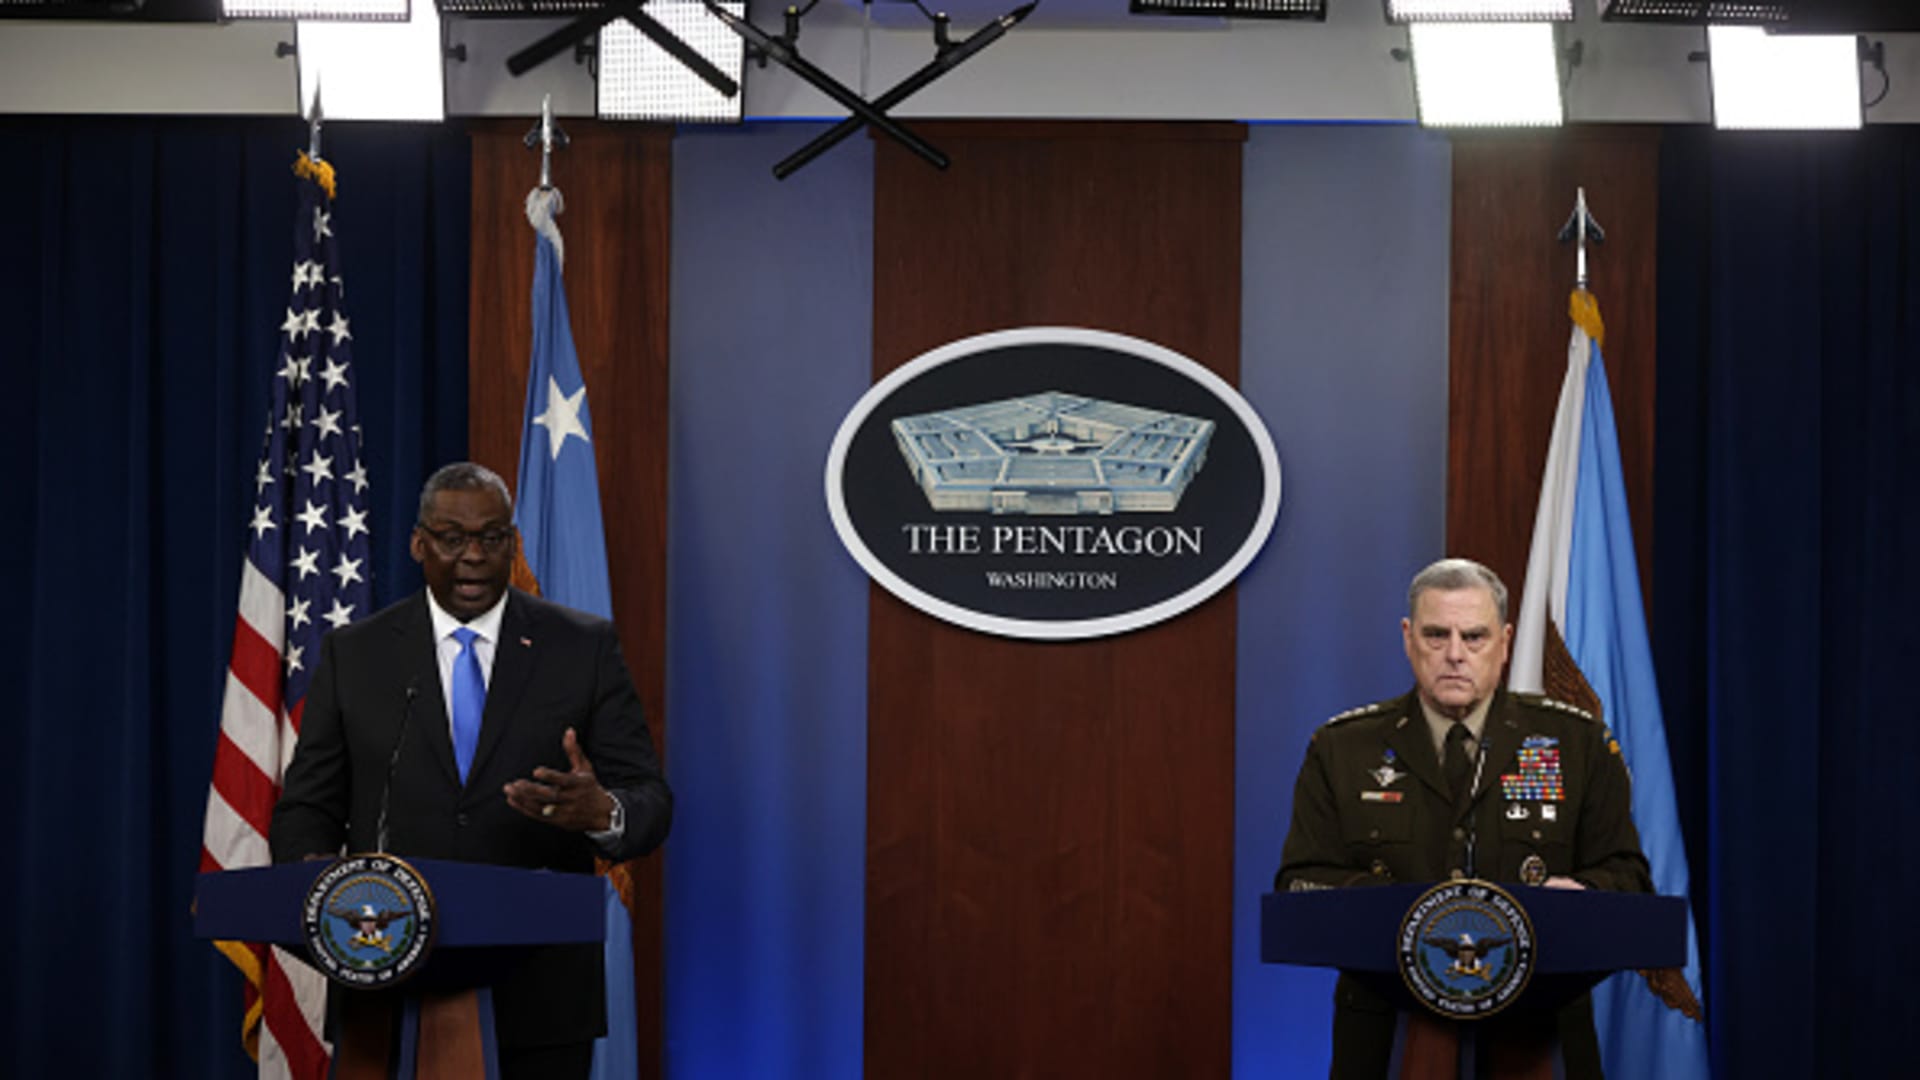 Secretary of Defense Lloyd Austin and Chairman of Joint Chiefs of Staff Gen. Mark Milley participate in a news briefing at the Pentagon July 21, 2021 in Arlington, Virginia.